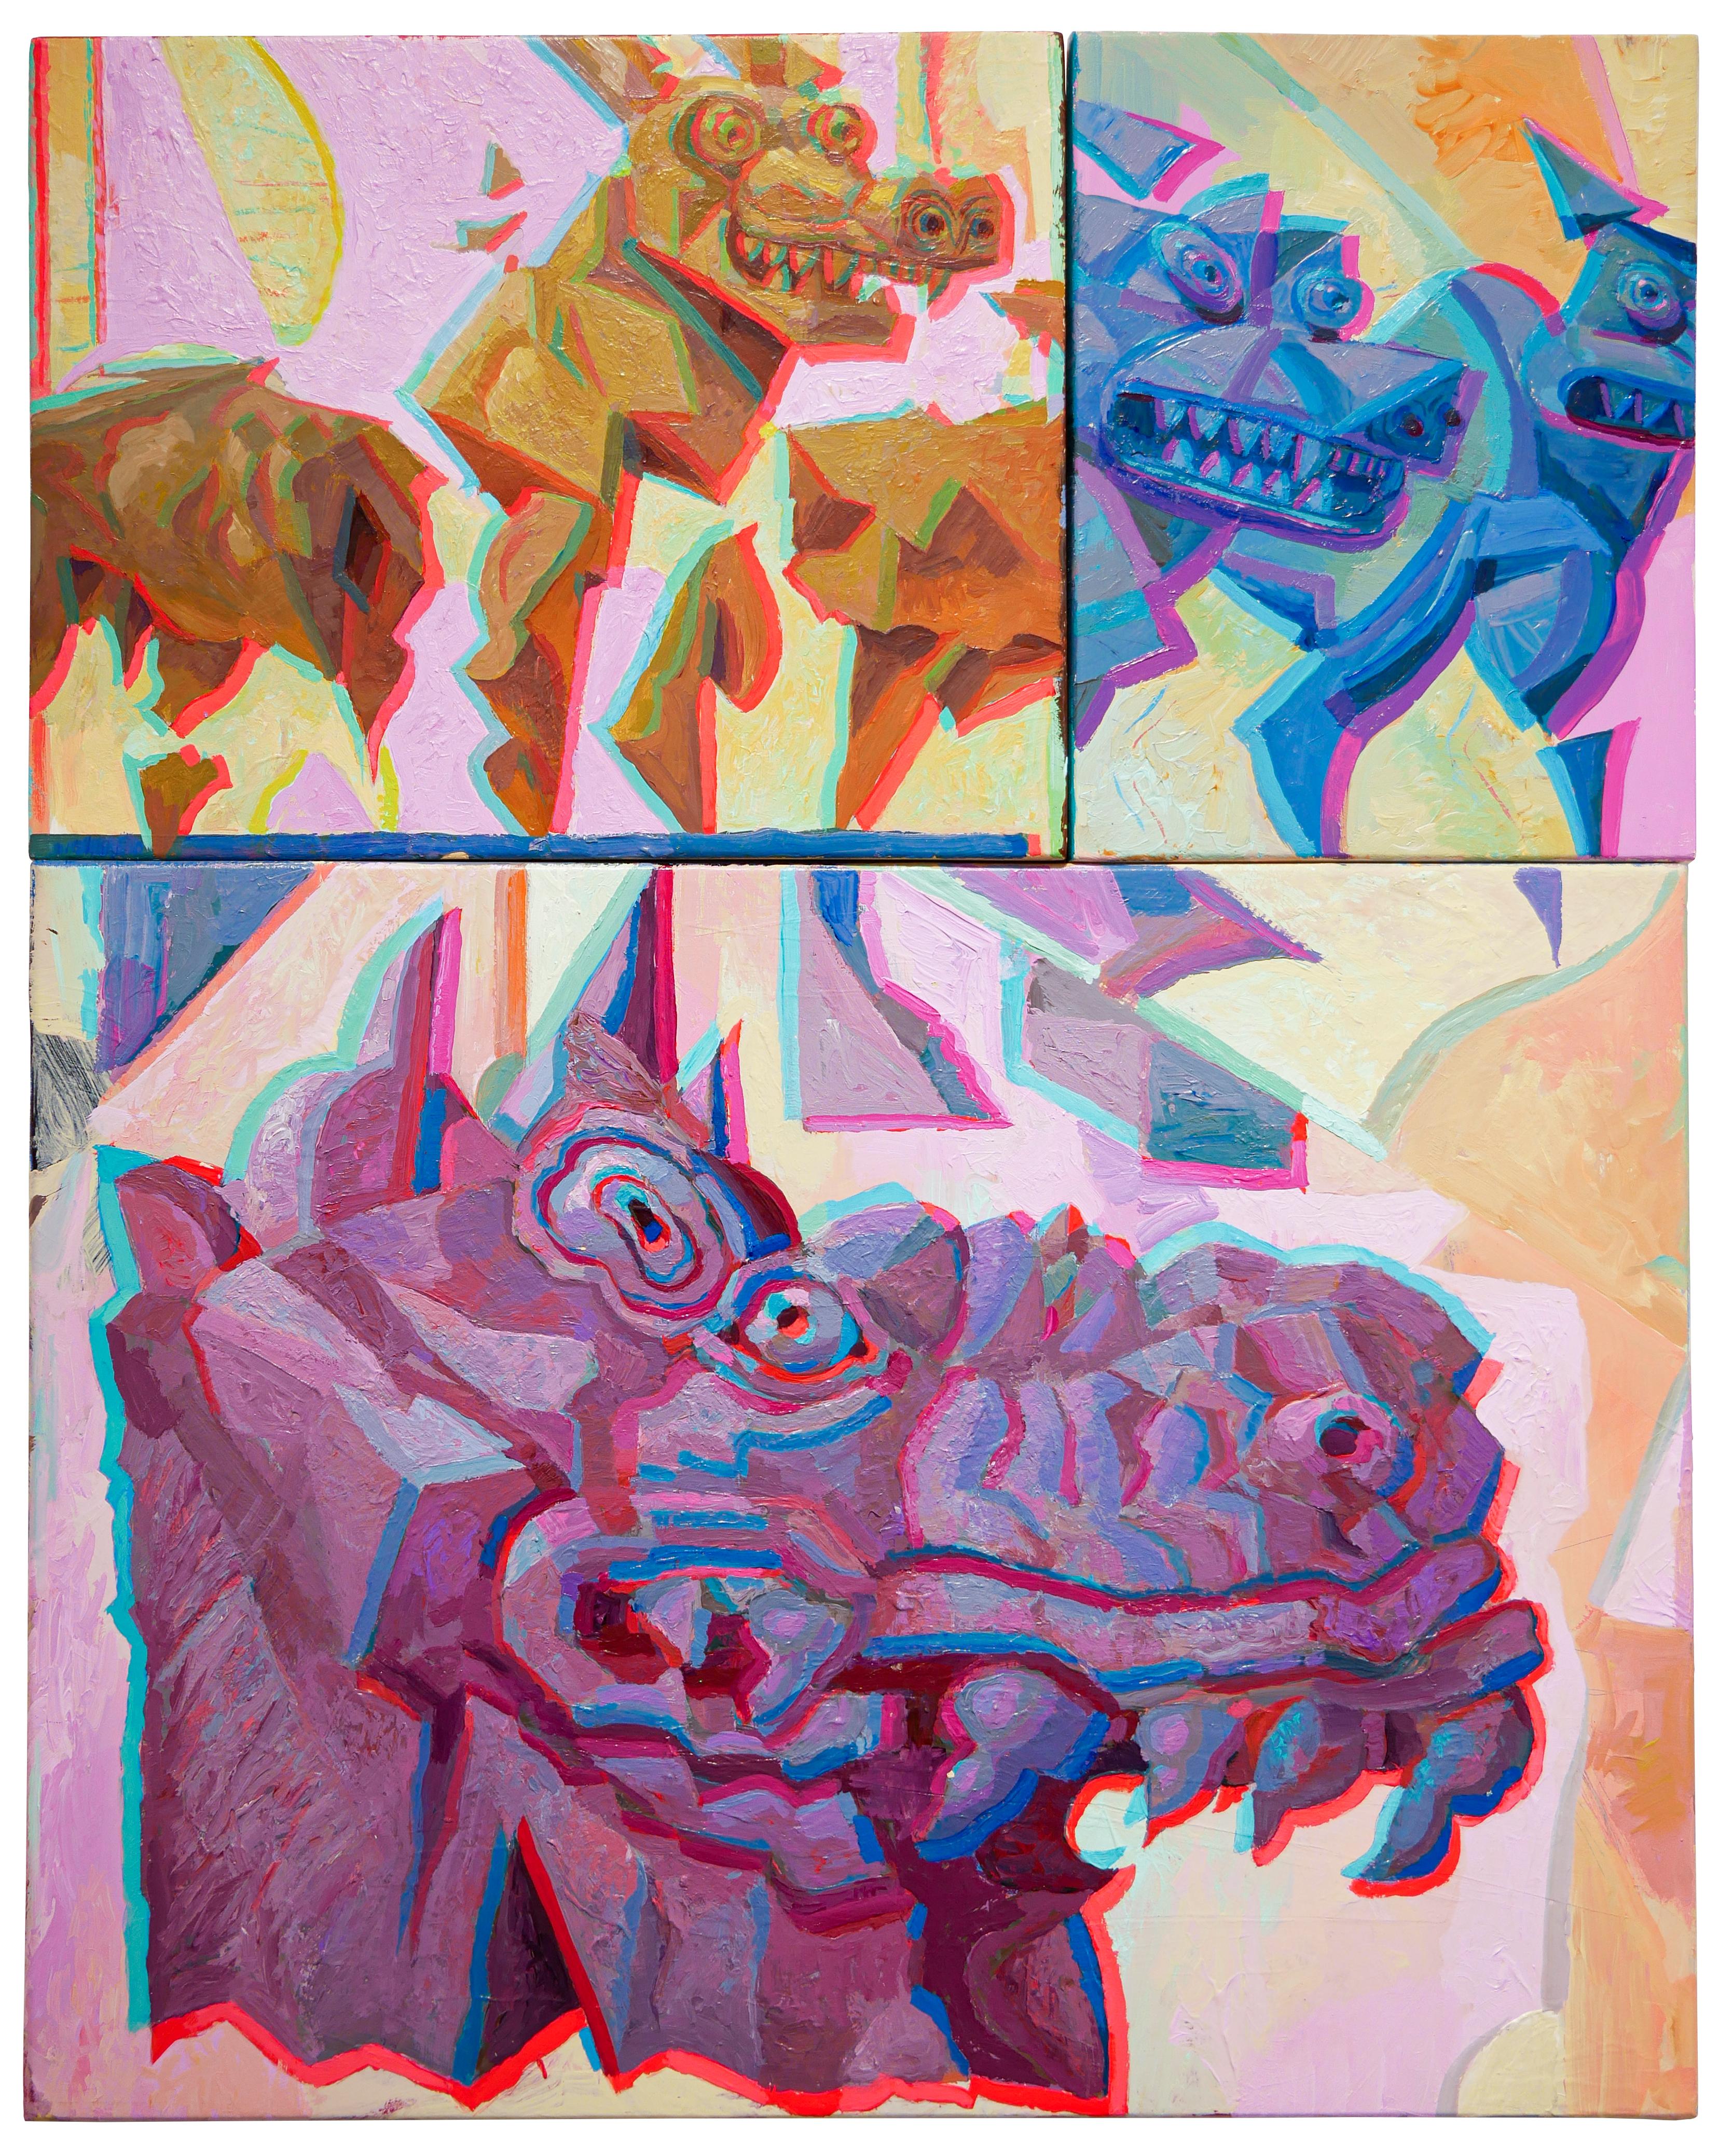 Robert MacKenzie Figurative Painting - "Copy of a Copy of a Fake" Purple, Neon Pink, and White Anaglyph Painting